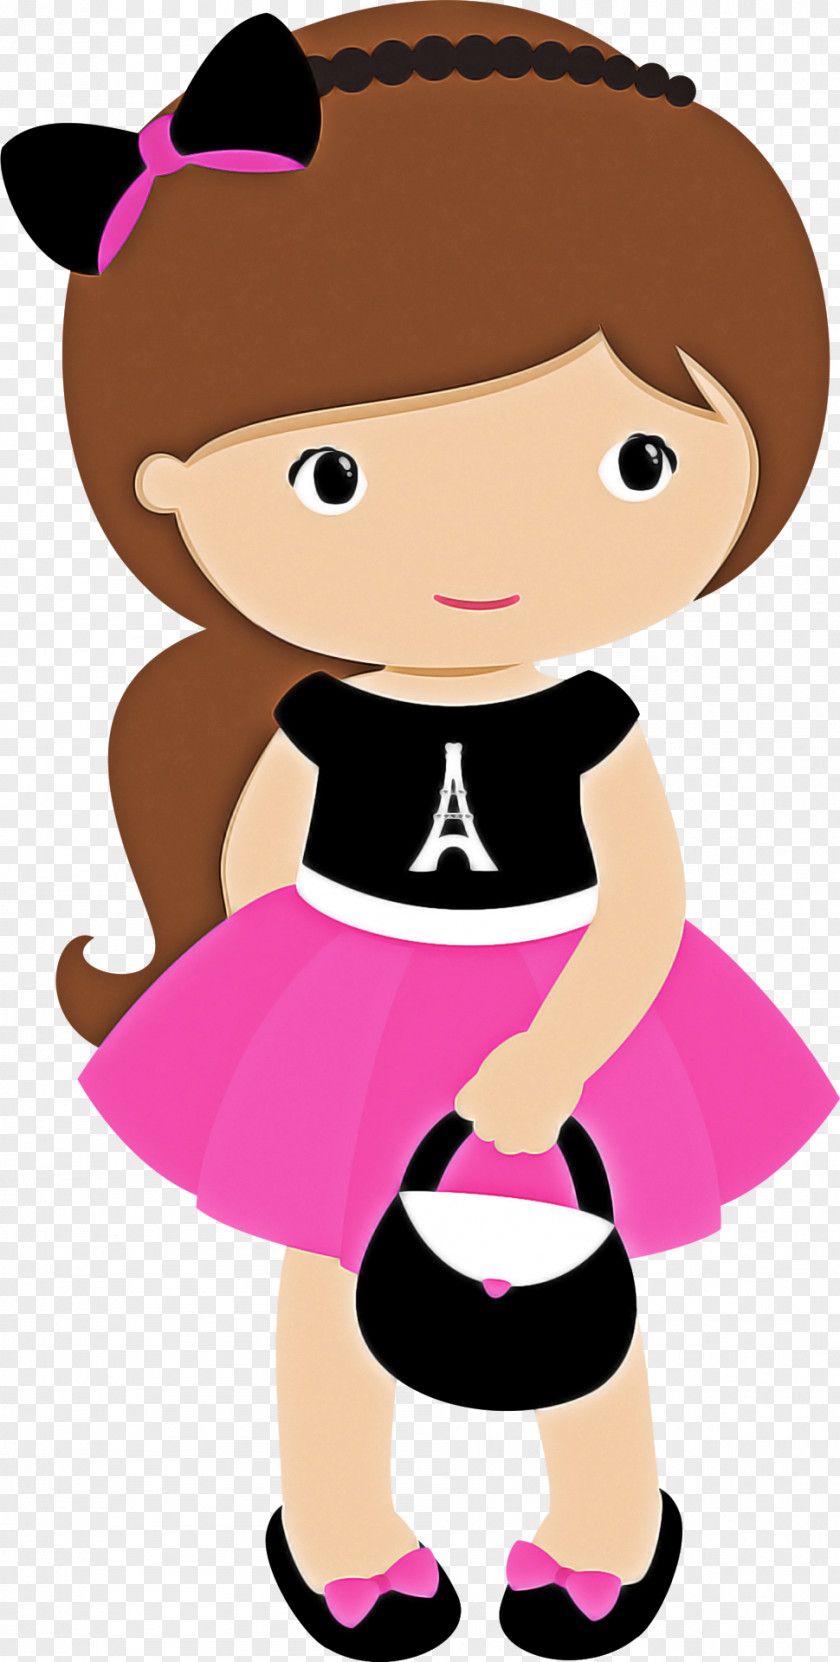 Style Fictional Character Cartoon Clip Art Pink Toy PNG